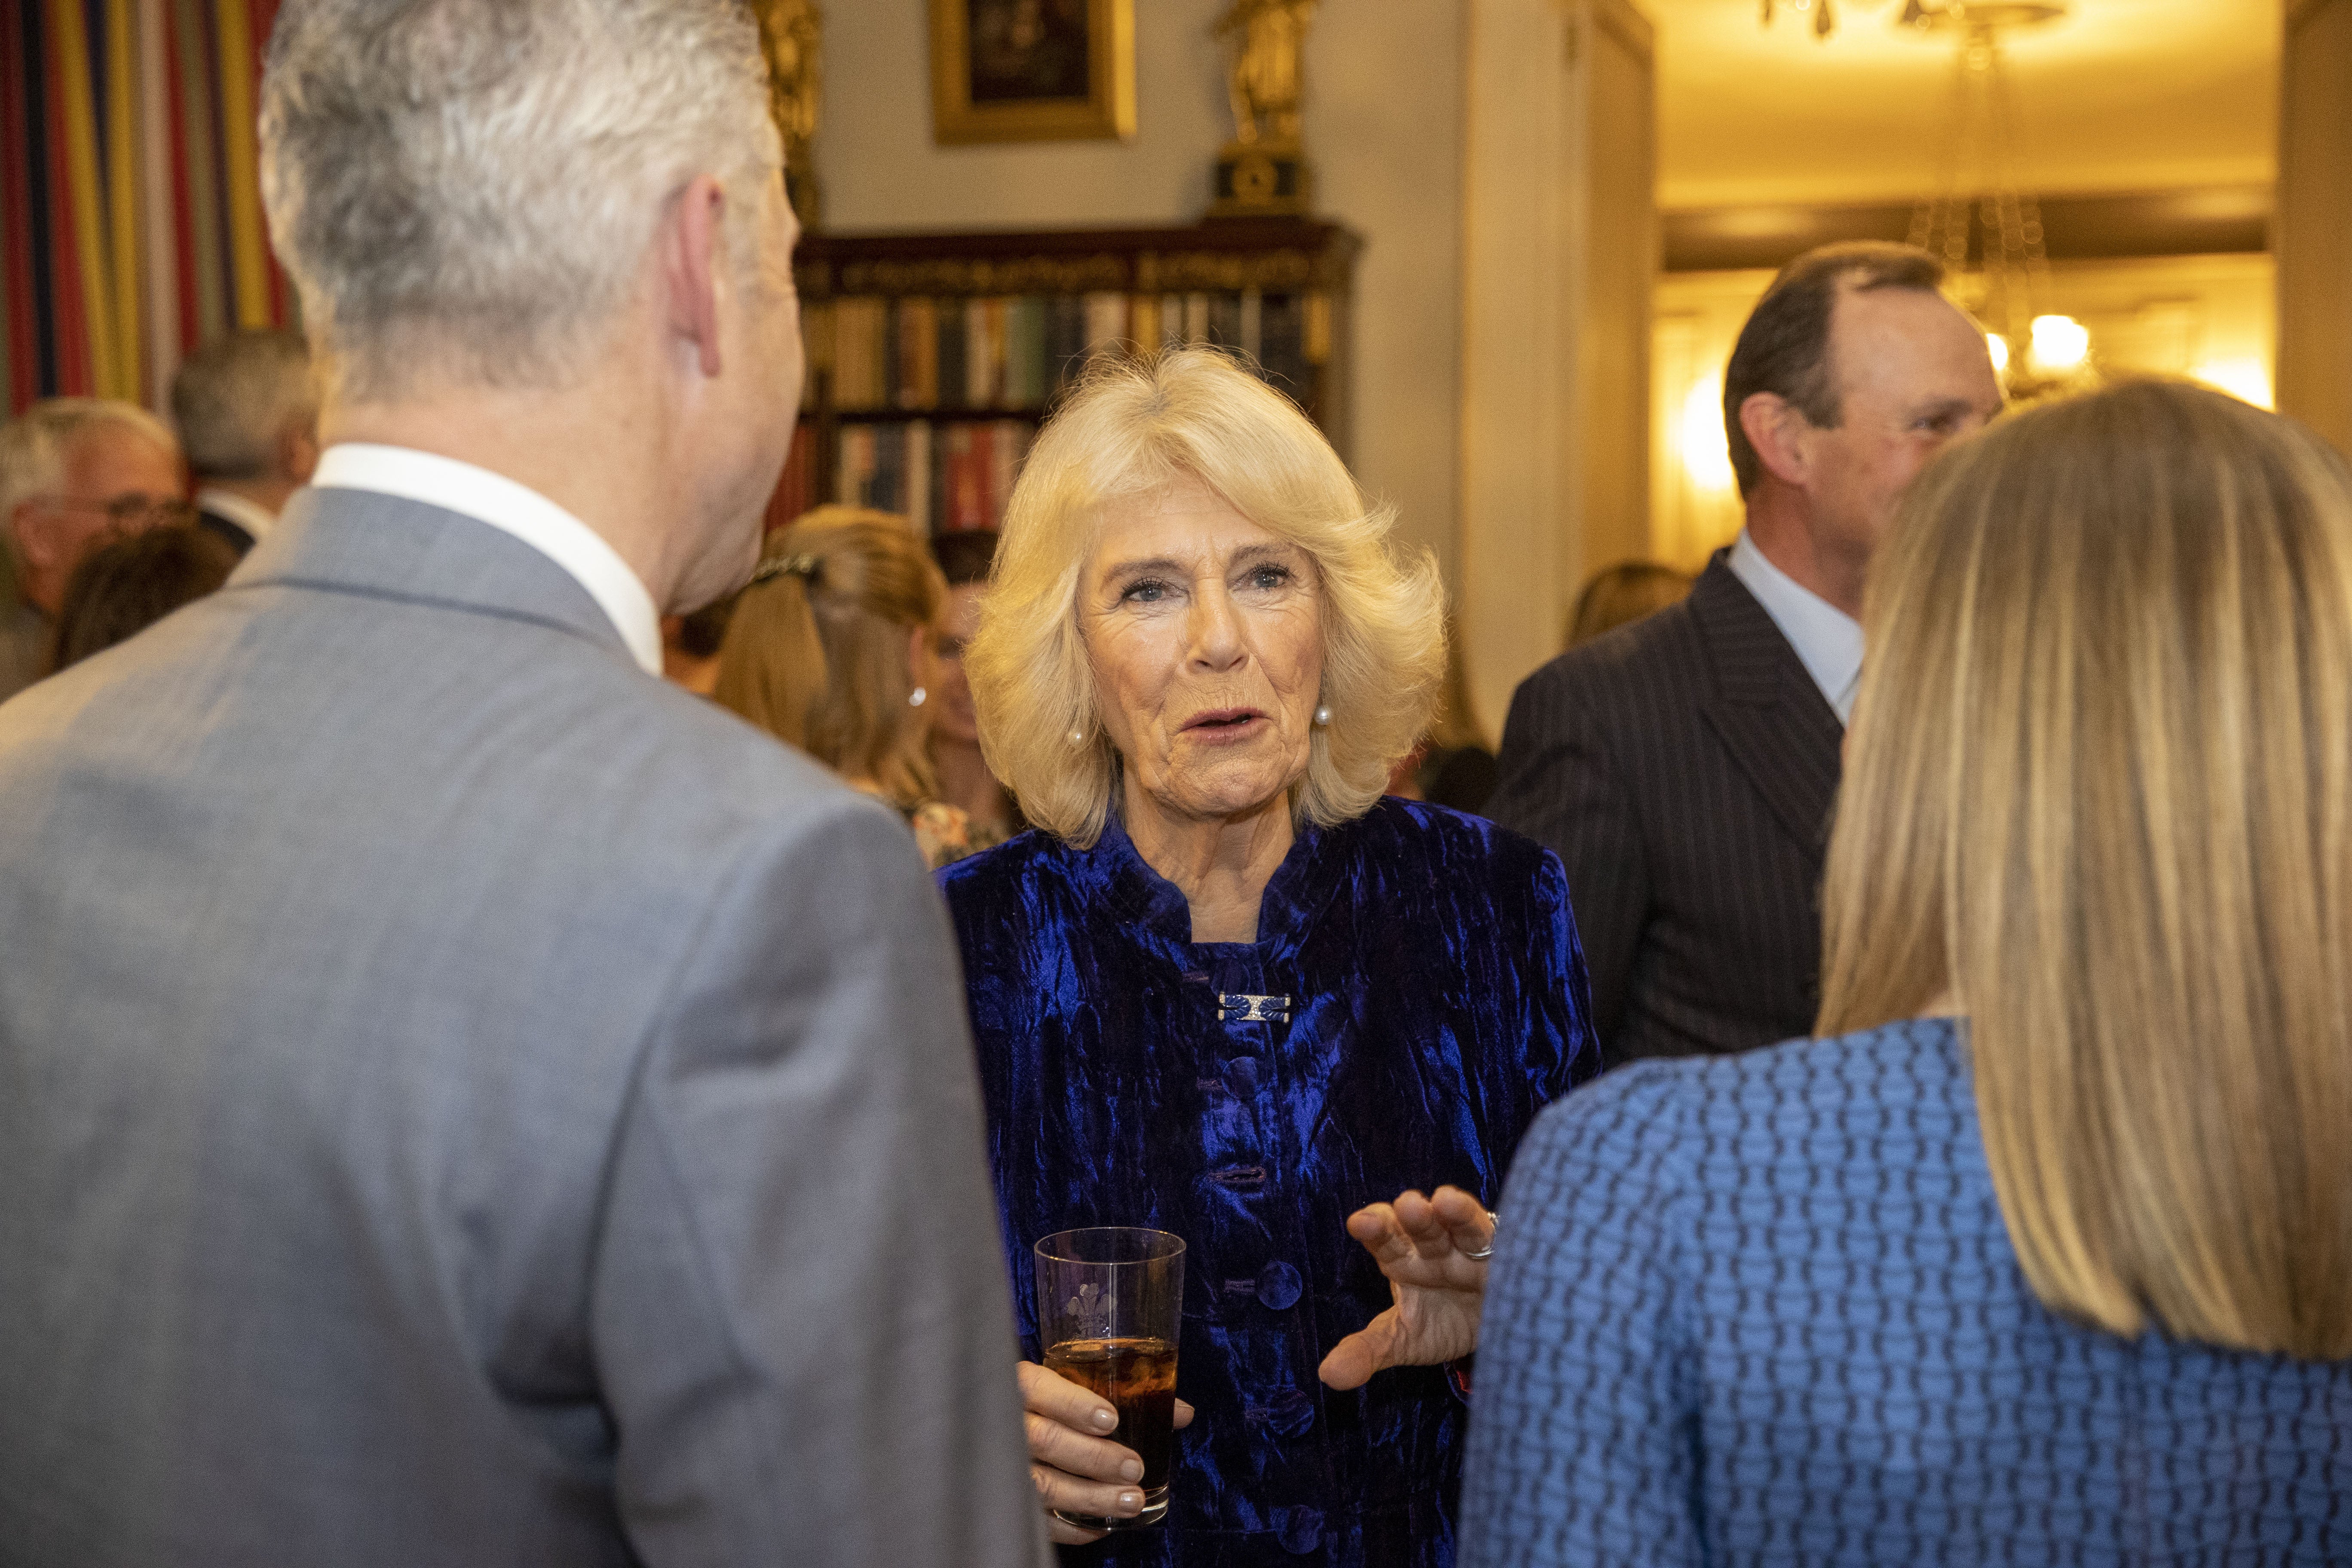 The Duchess of Cornwall talks to guests at Clarence House (Steve Reigate/Daily Express/PA Wire)